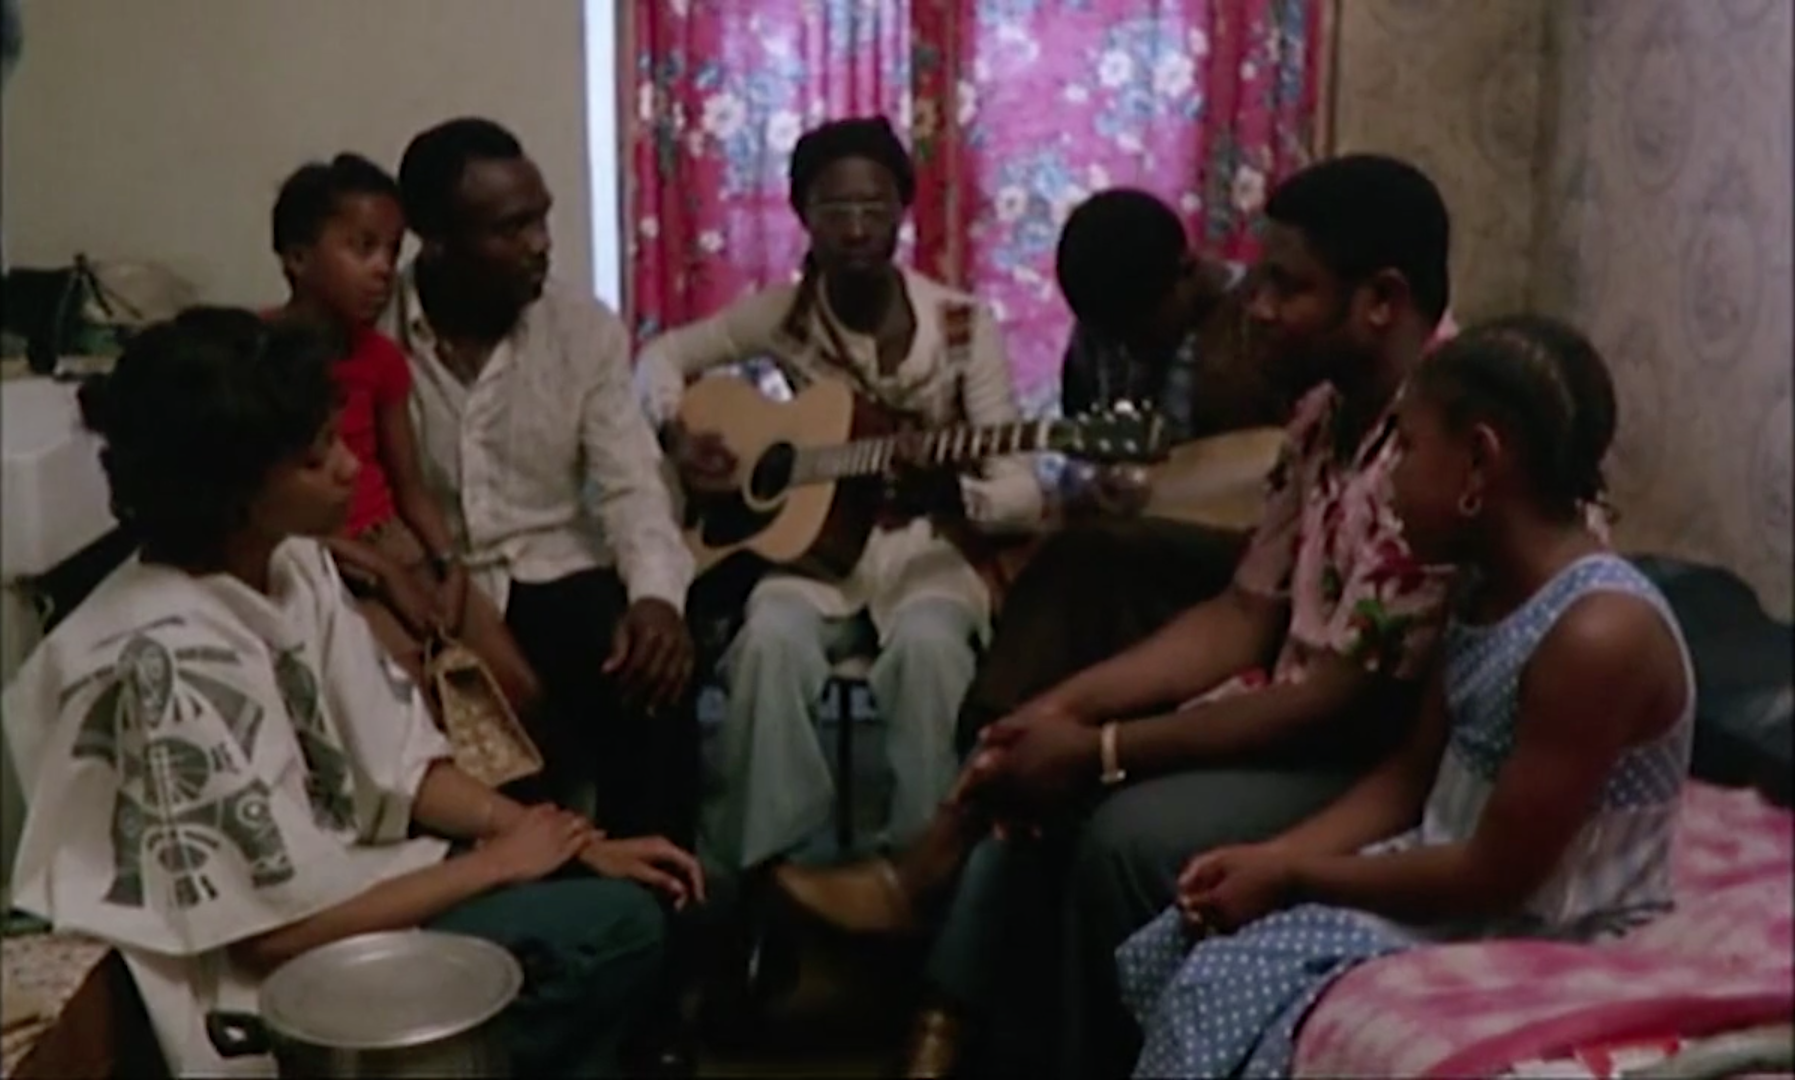 The Paris Review - How Sidney Sokhona's Films Changed